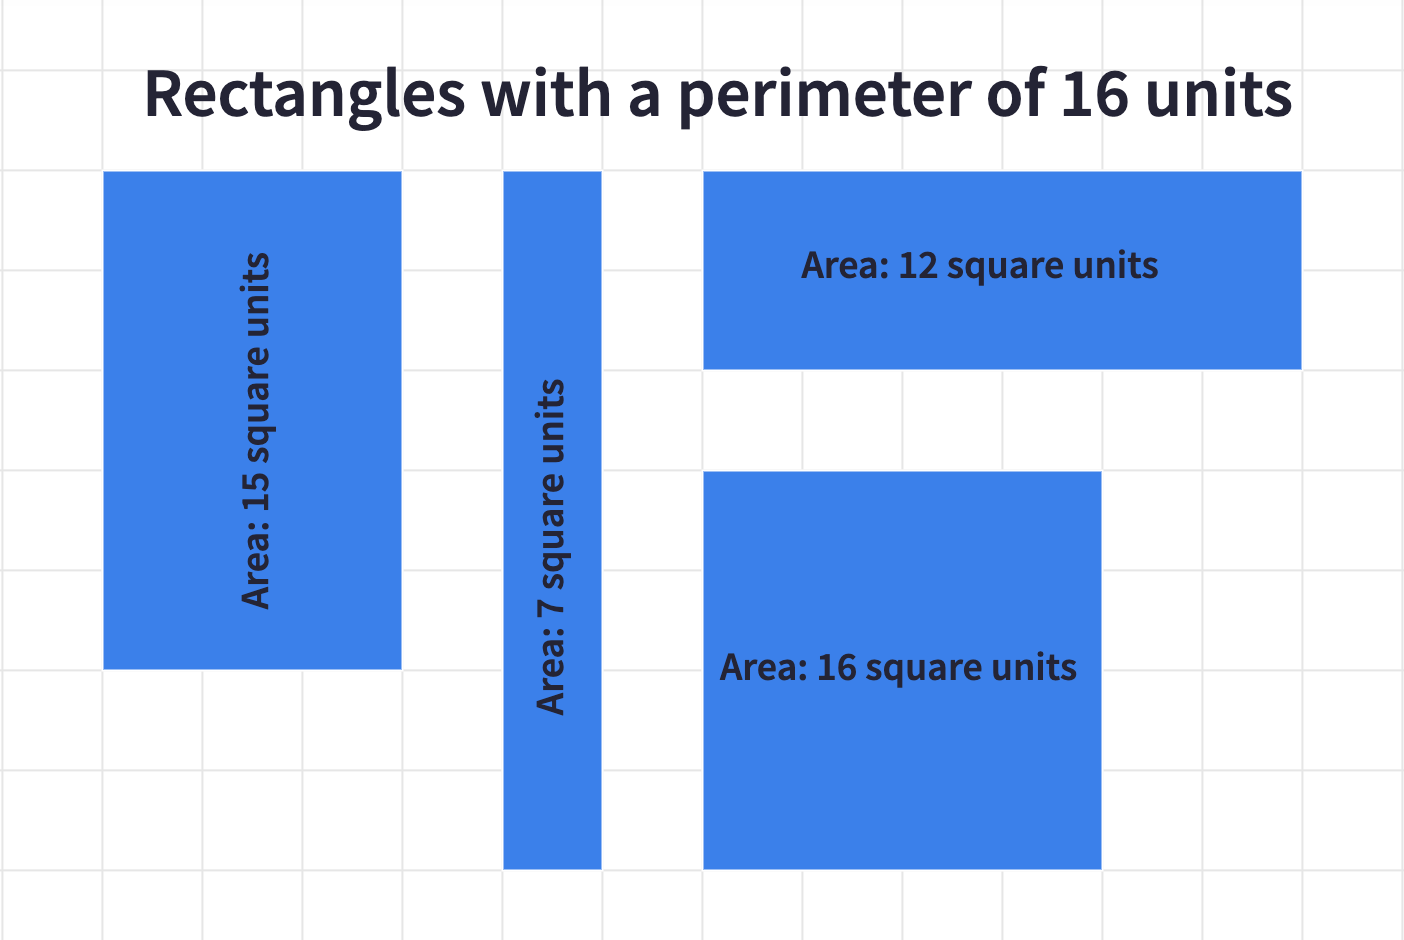 perimeter of different shapes